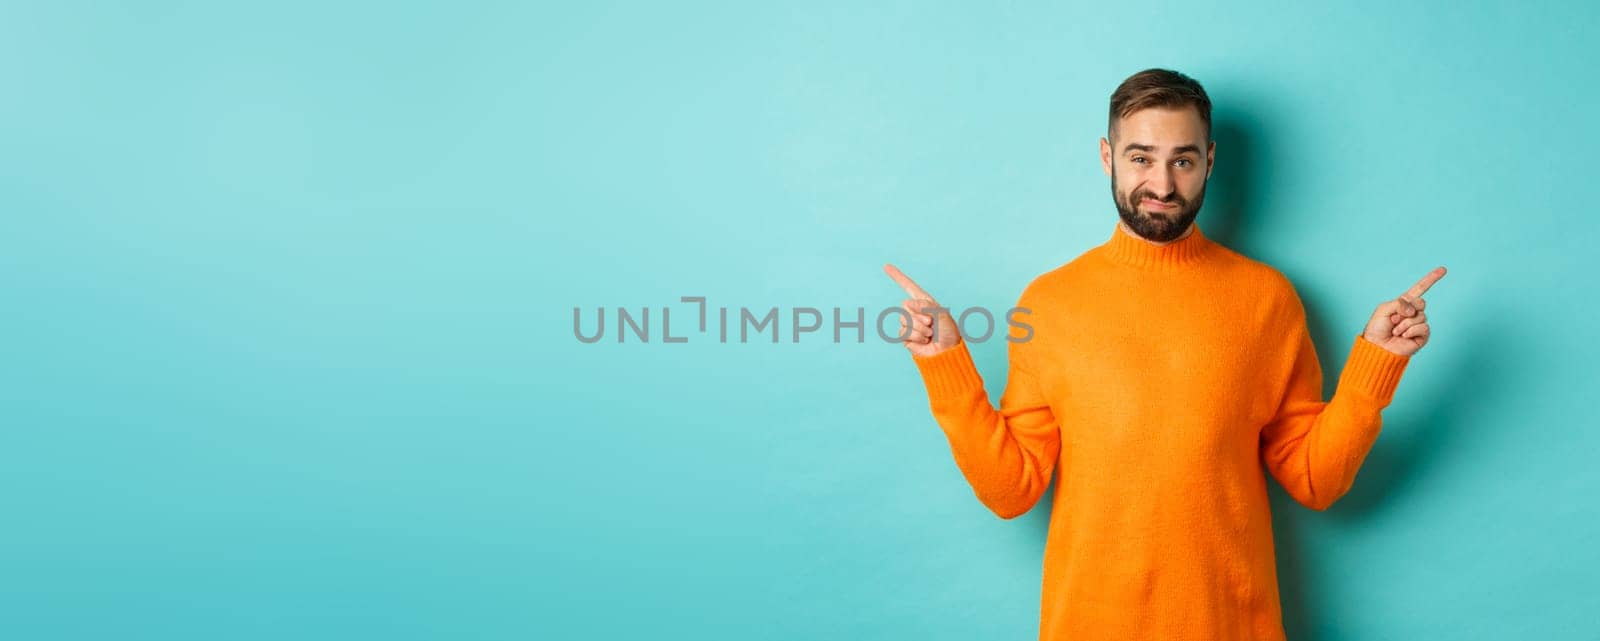 Doubtful and indecisive man pointing fingers sideways, showing different sides, two choices, looking skeptical, standing over light blue background.